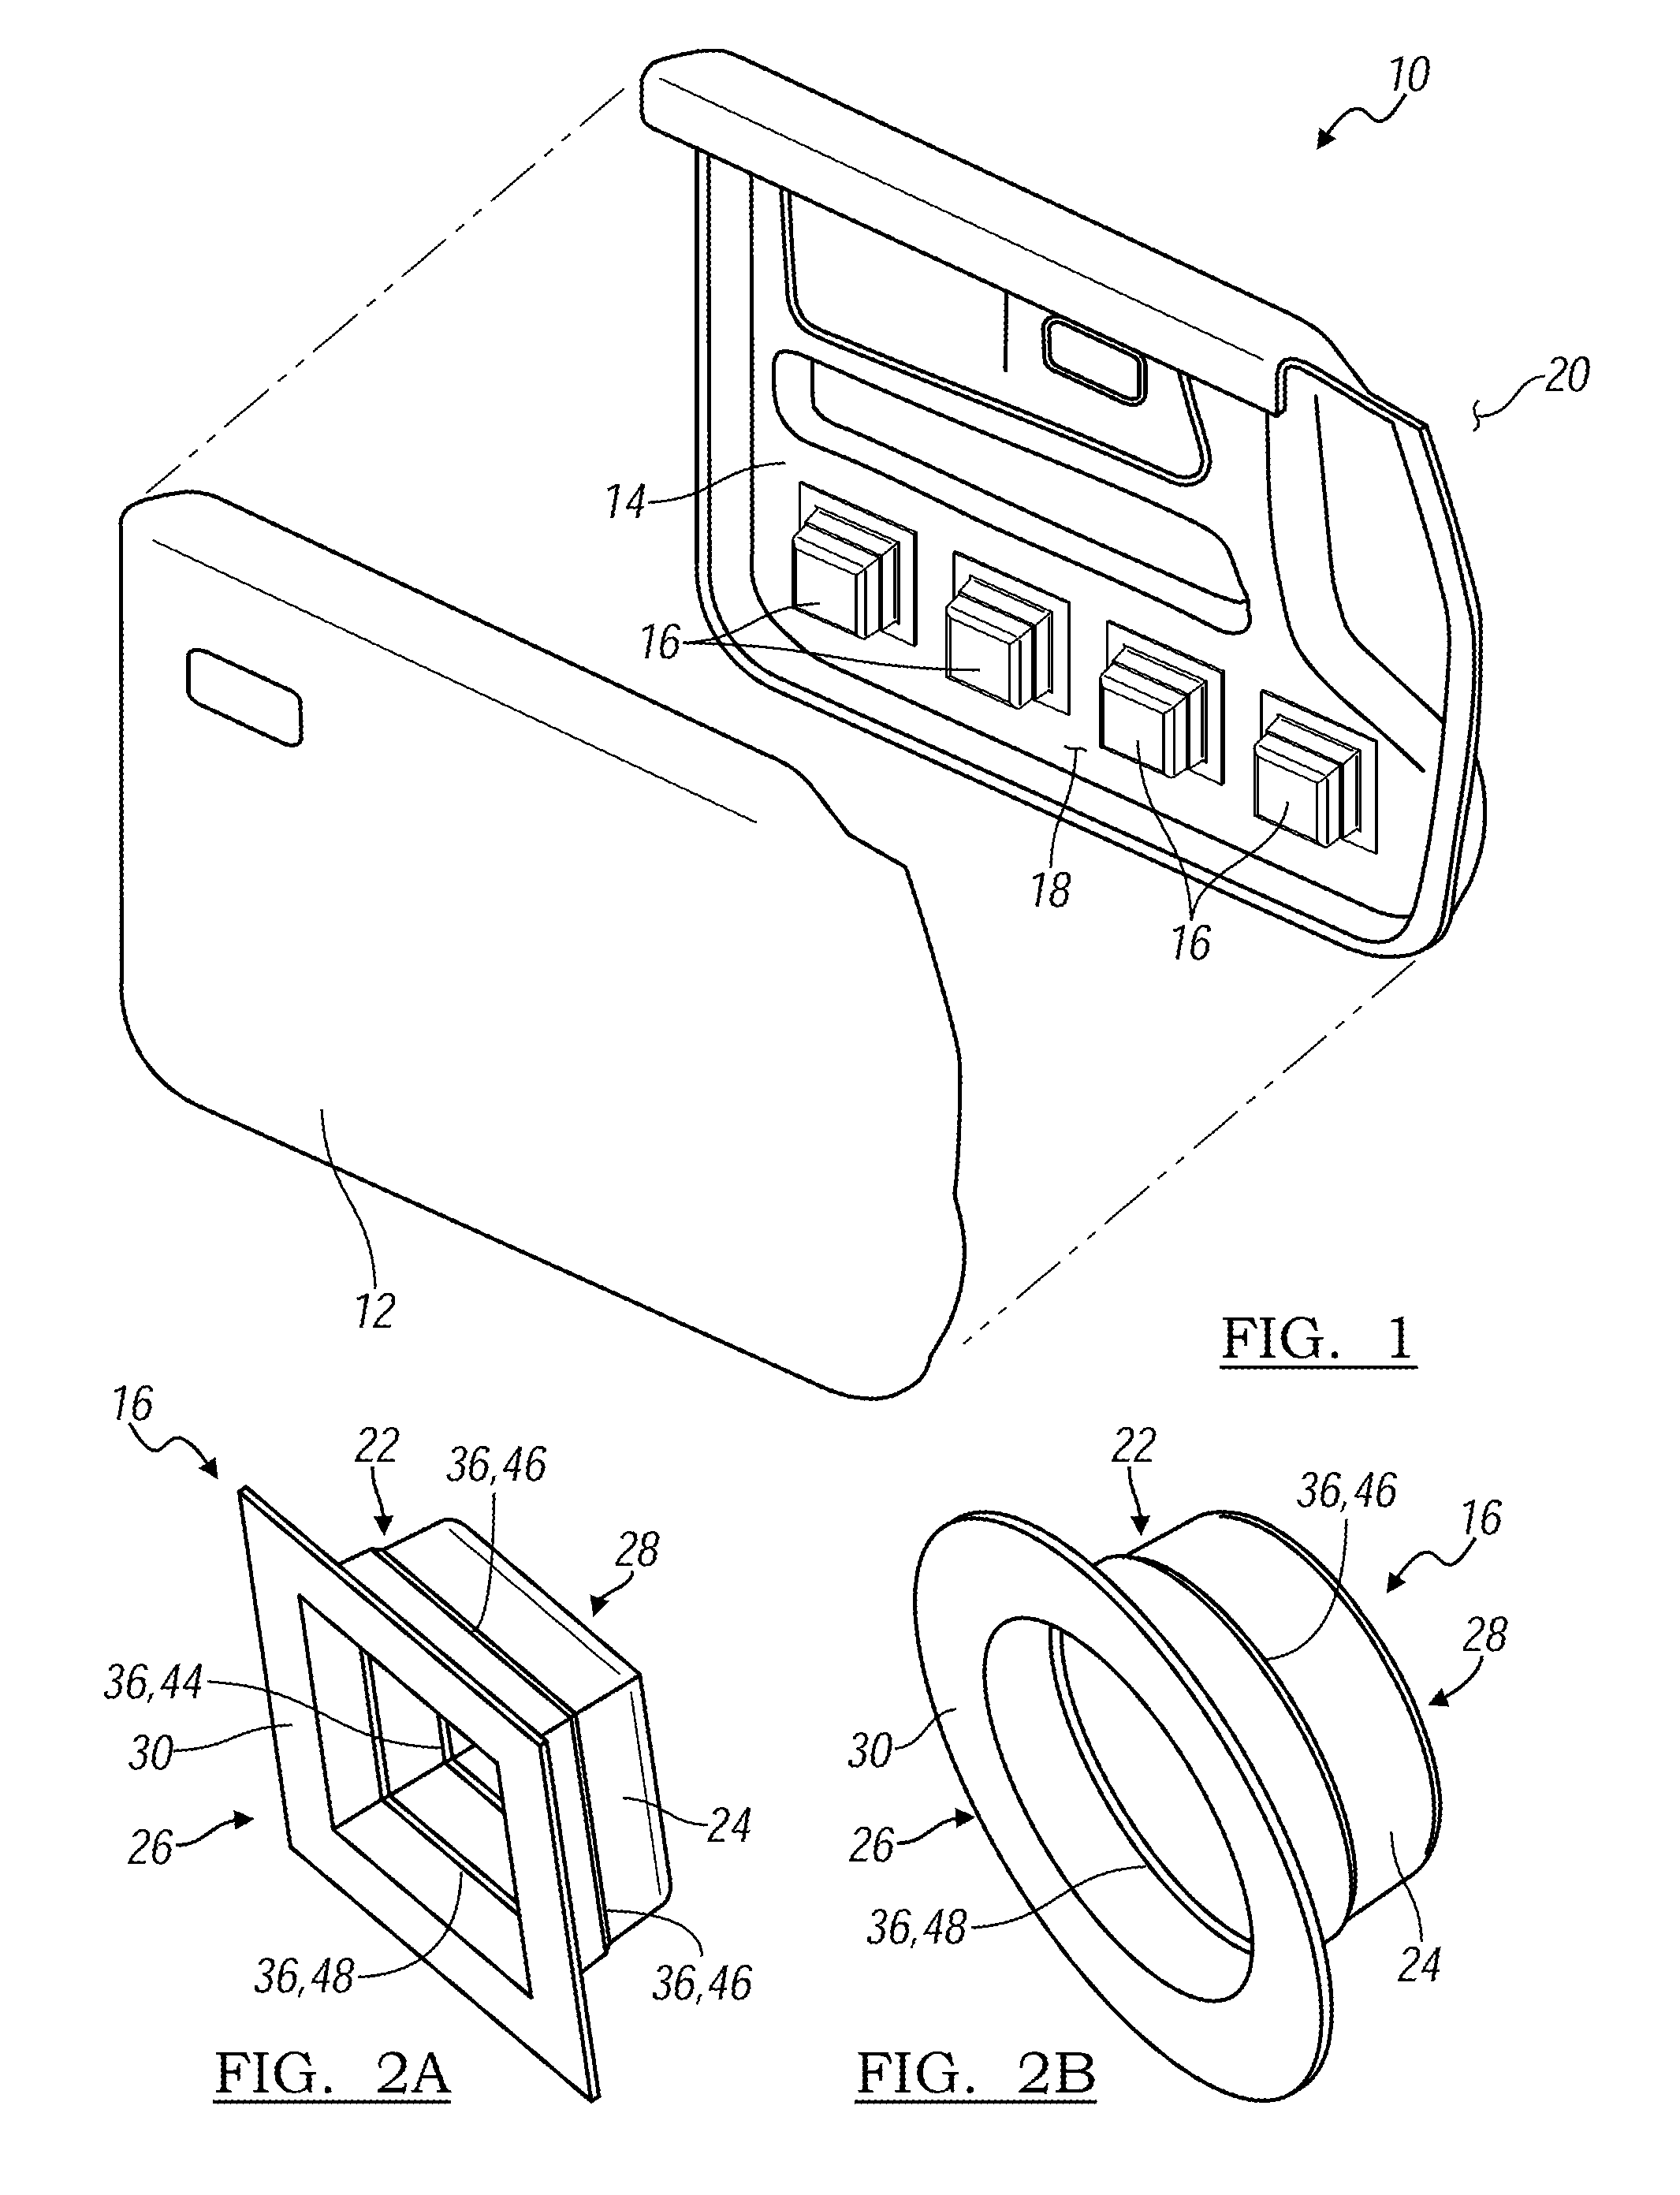 Energy absorbing component